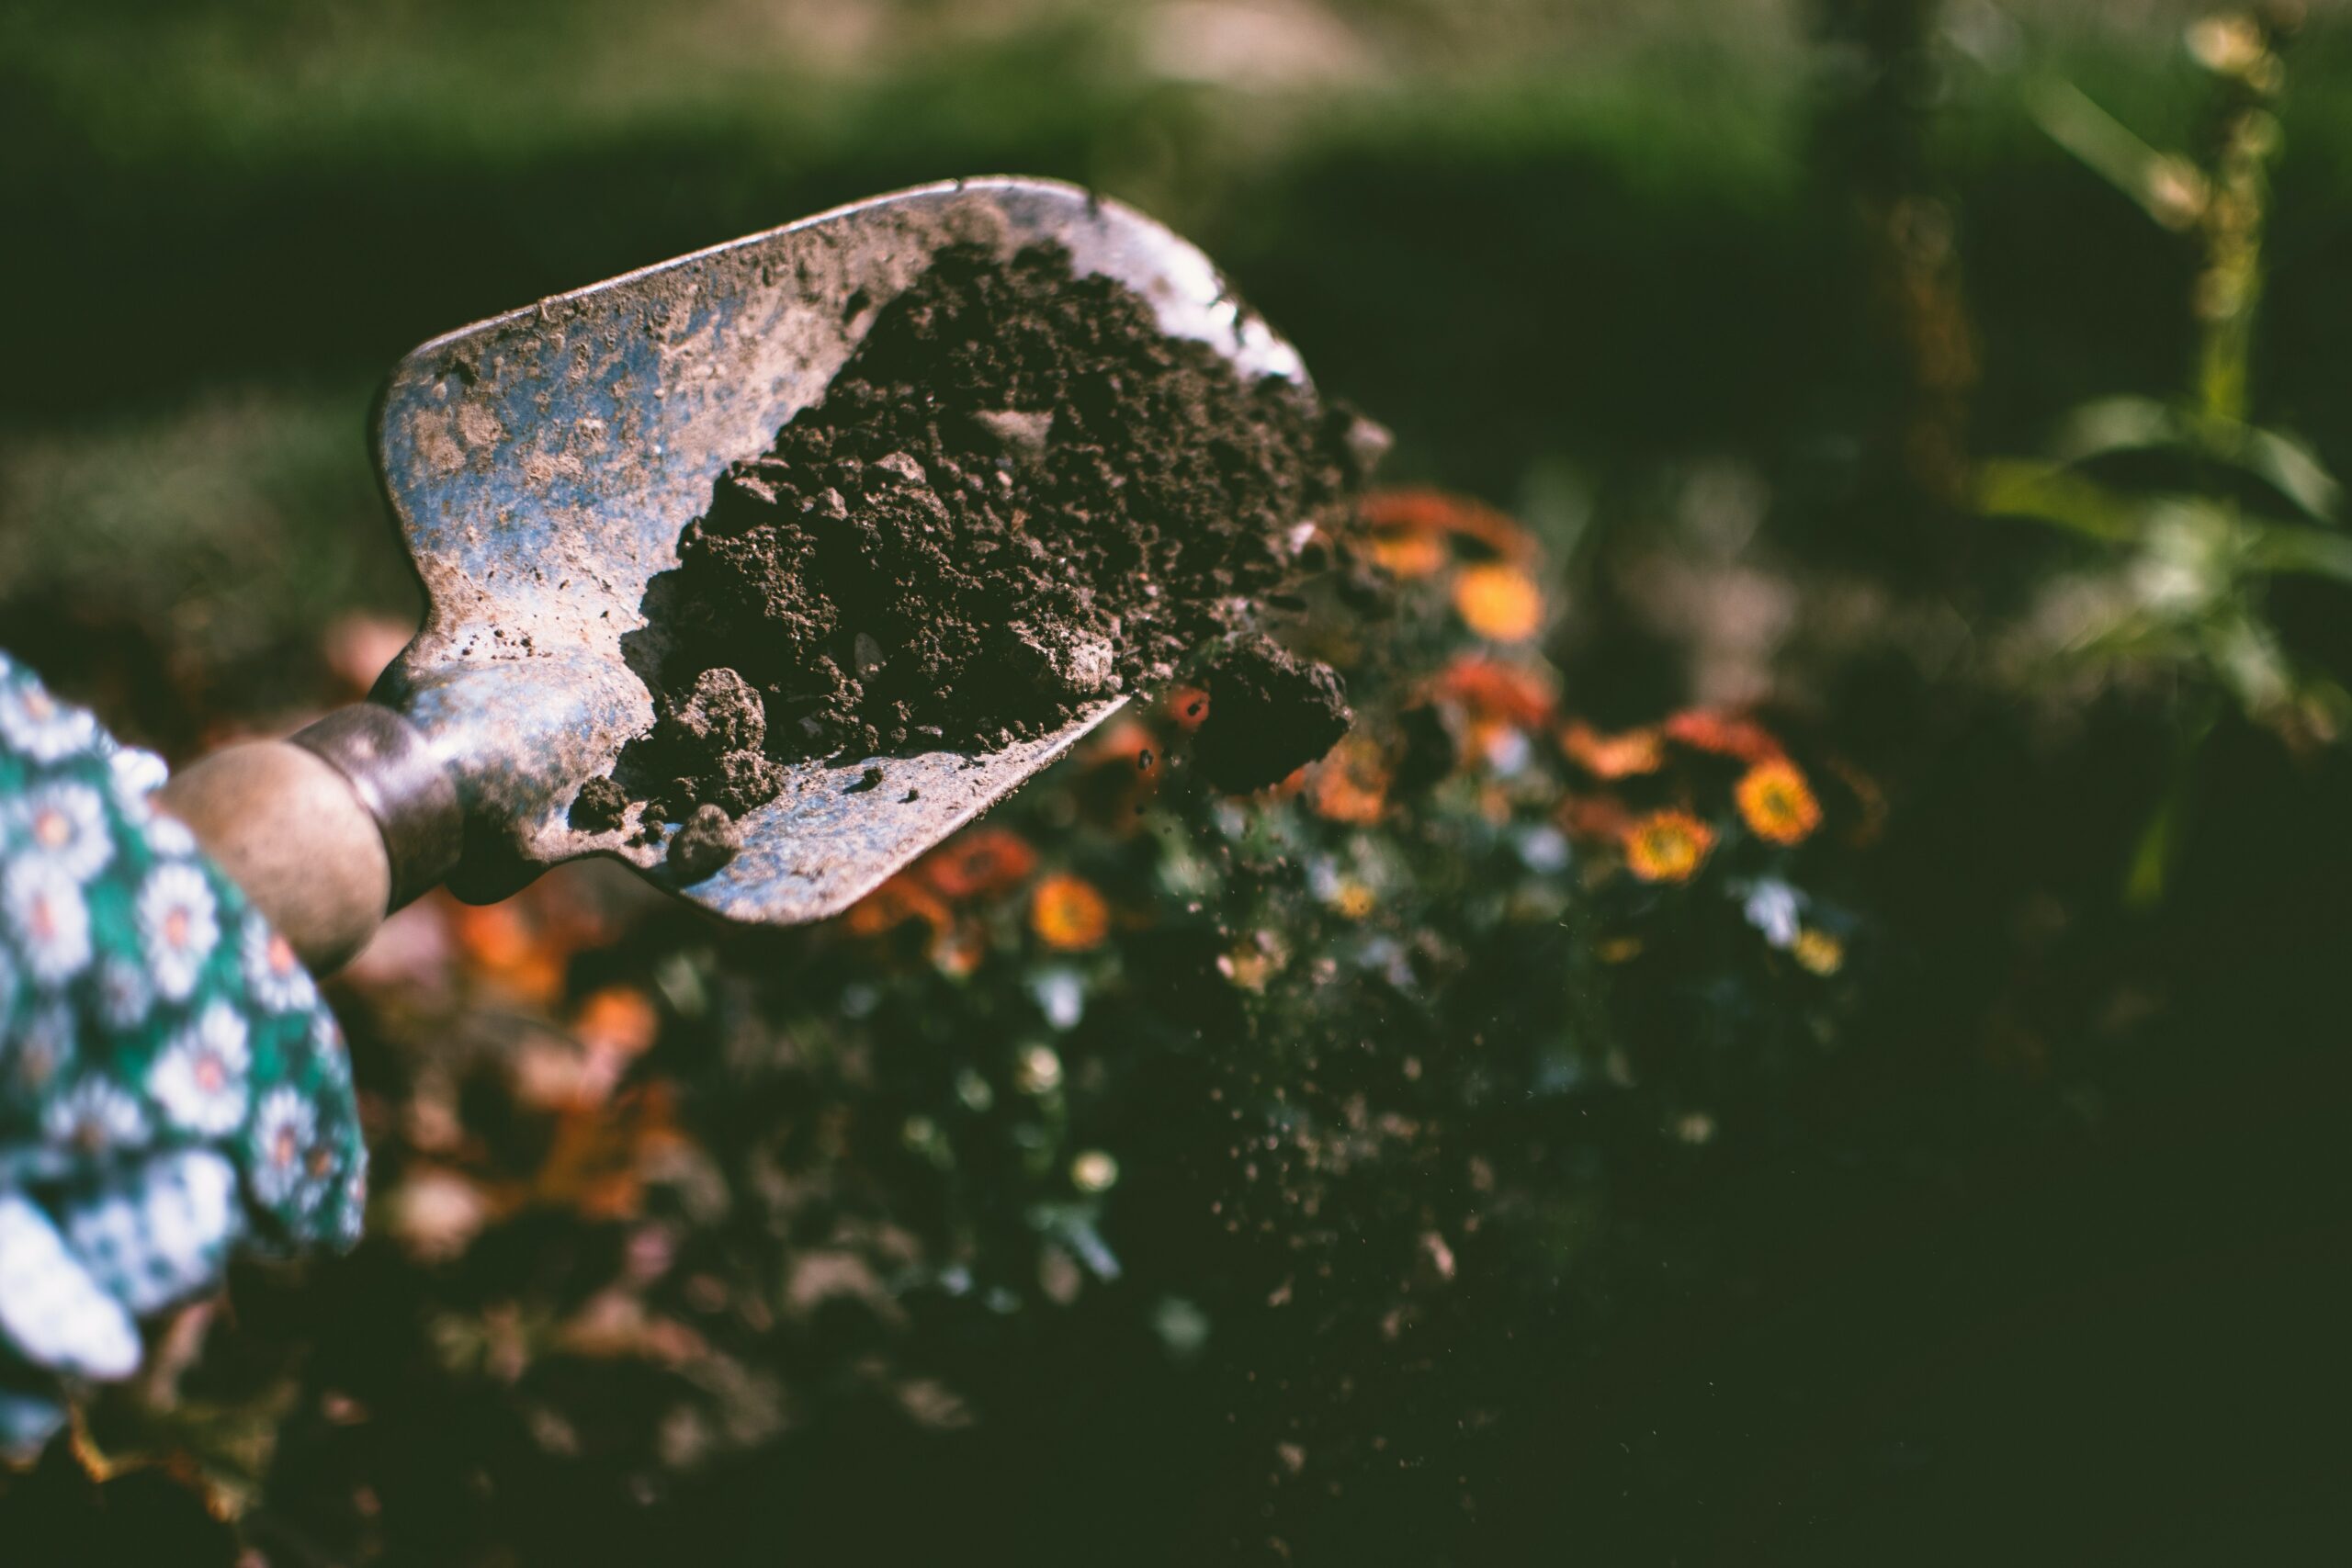 Compost can help protect us from food poisoning